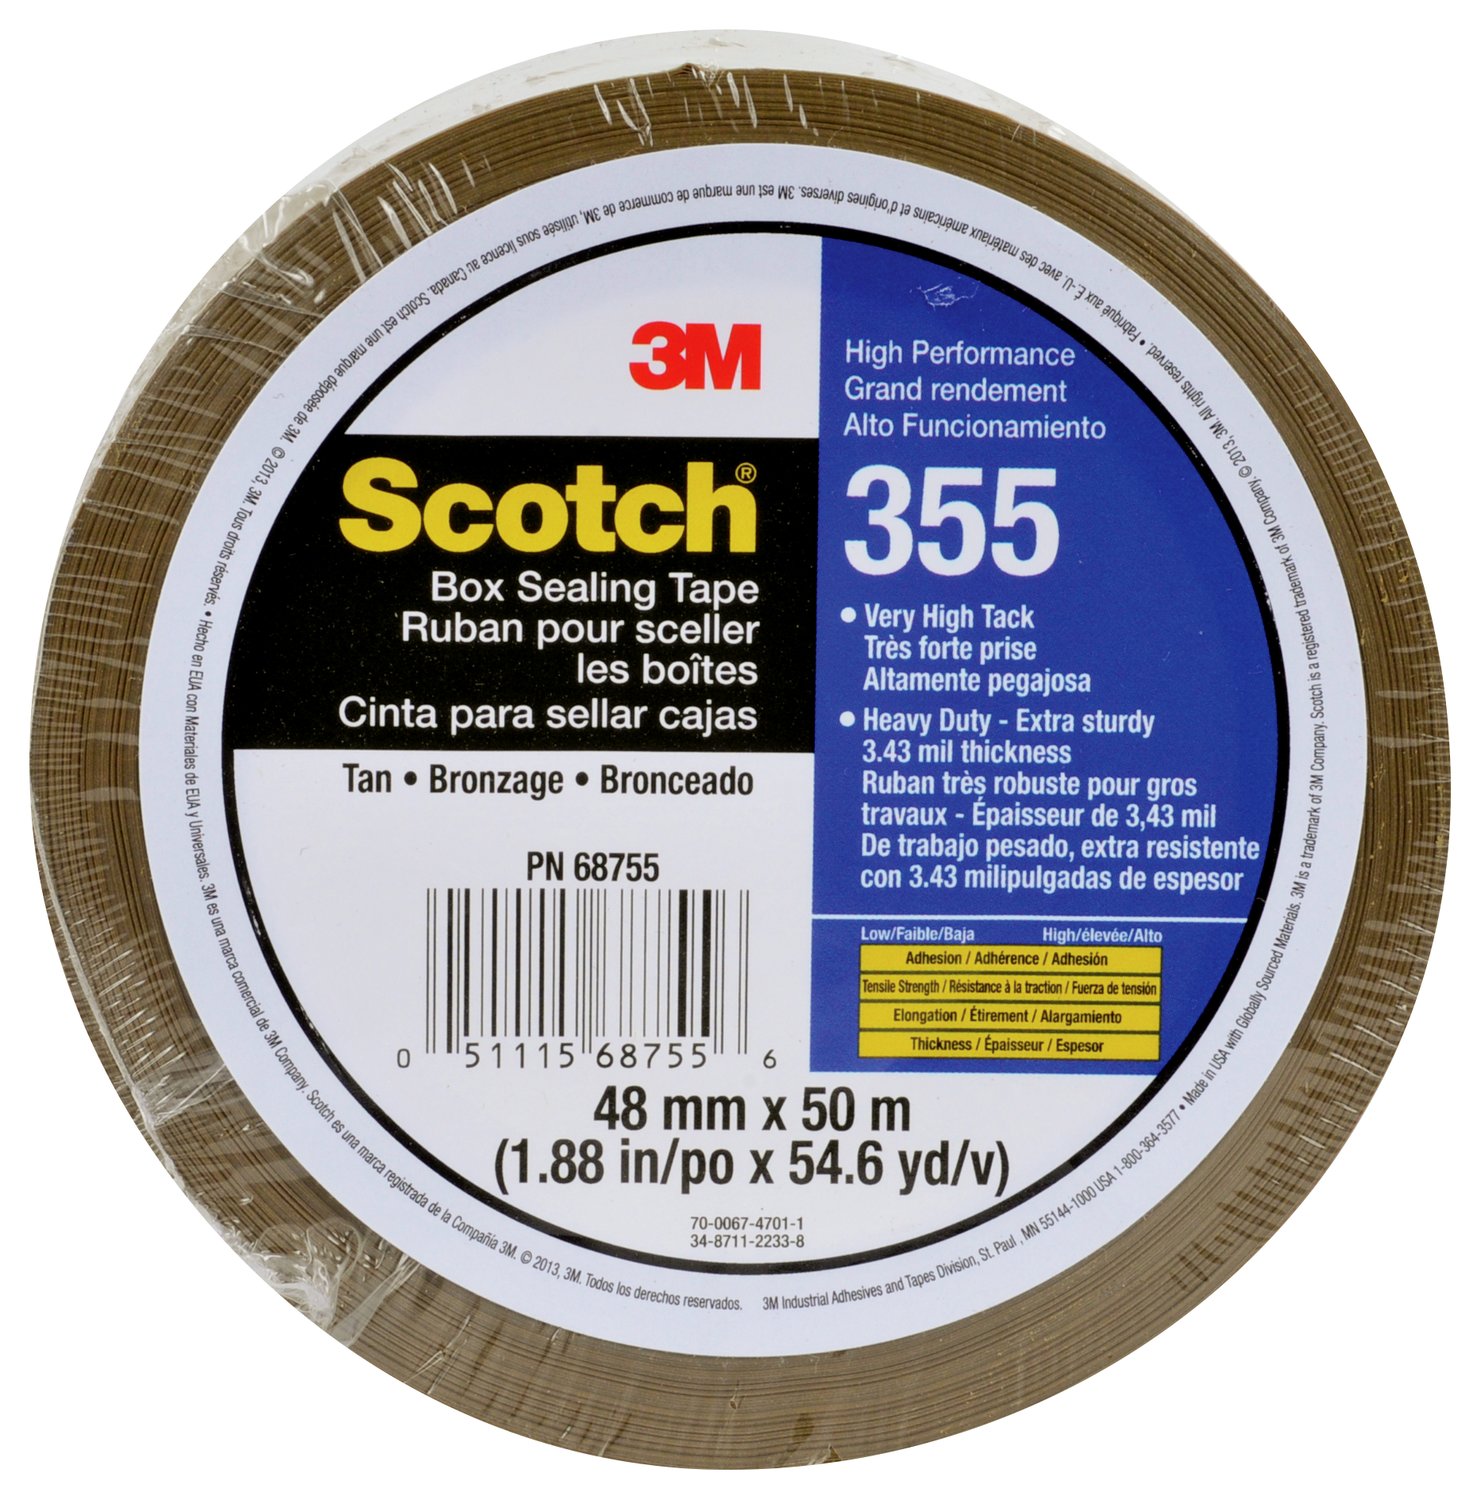 7010374957 - Scotch Box Sealing Tape 355, Tan, 48 mm x 50 m, 36/Case, Individually
Wrapped Conveniently Packaged